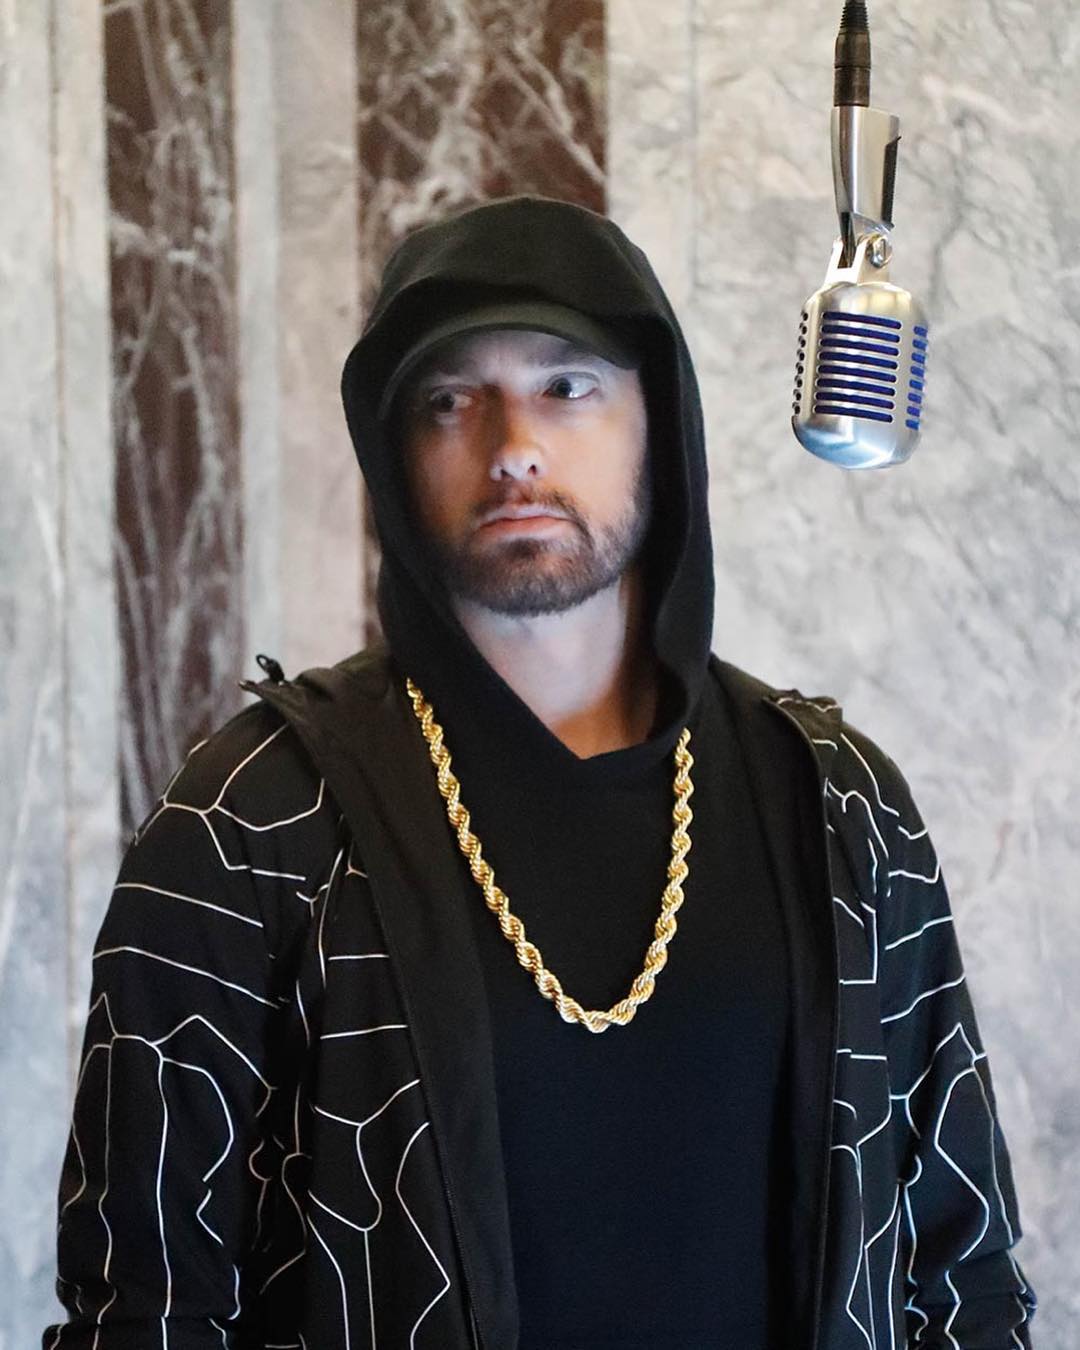 Eminem captured on camera looking sideways, with a suspended microphone in front of him.